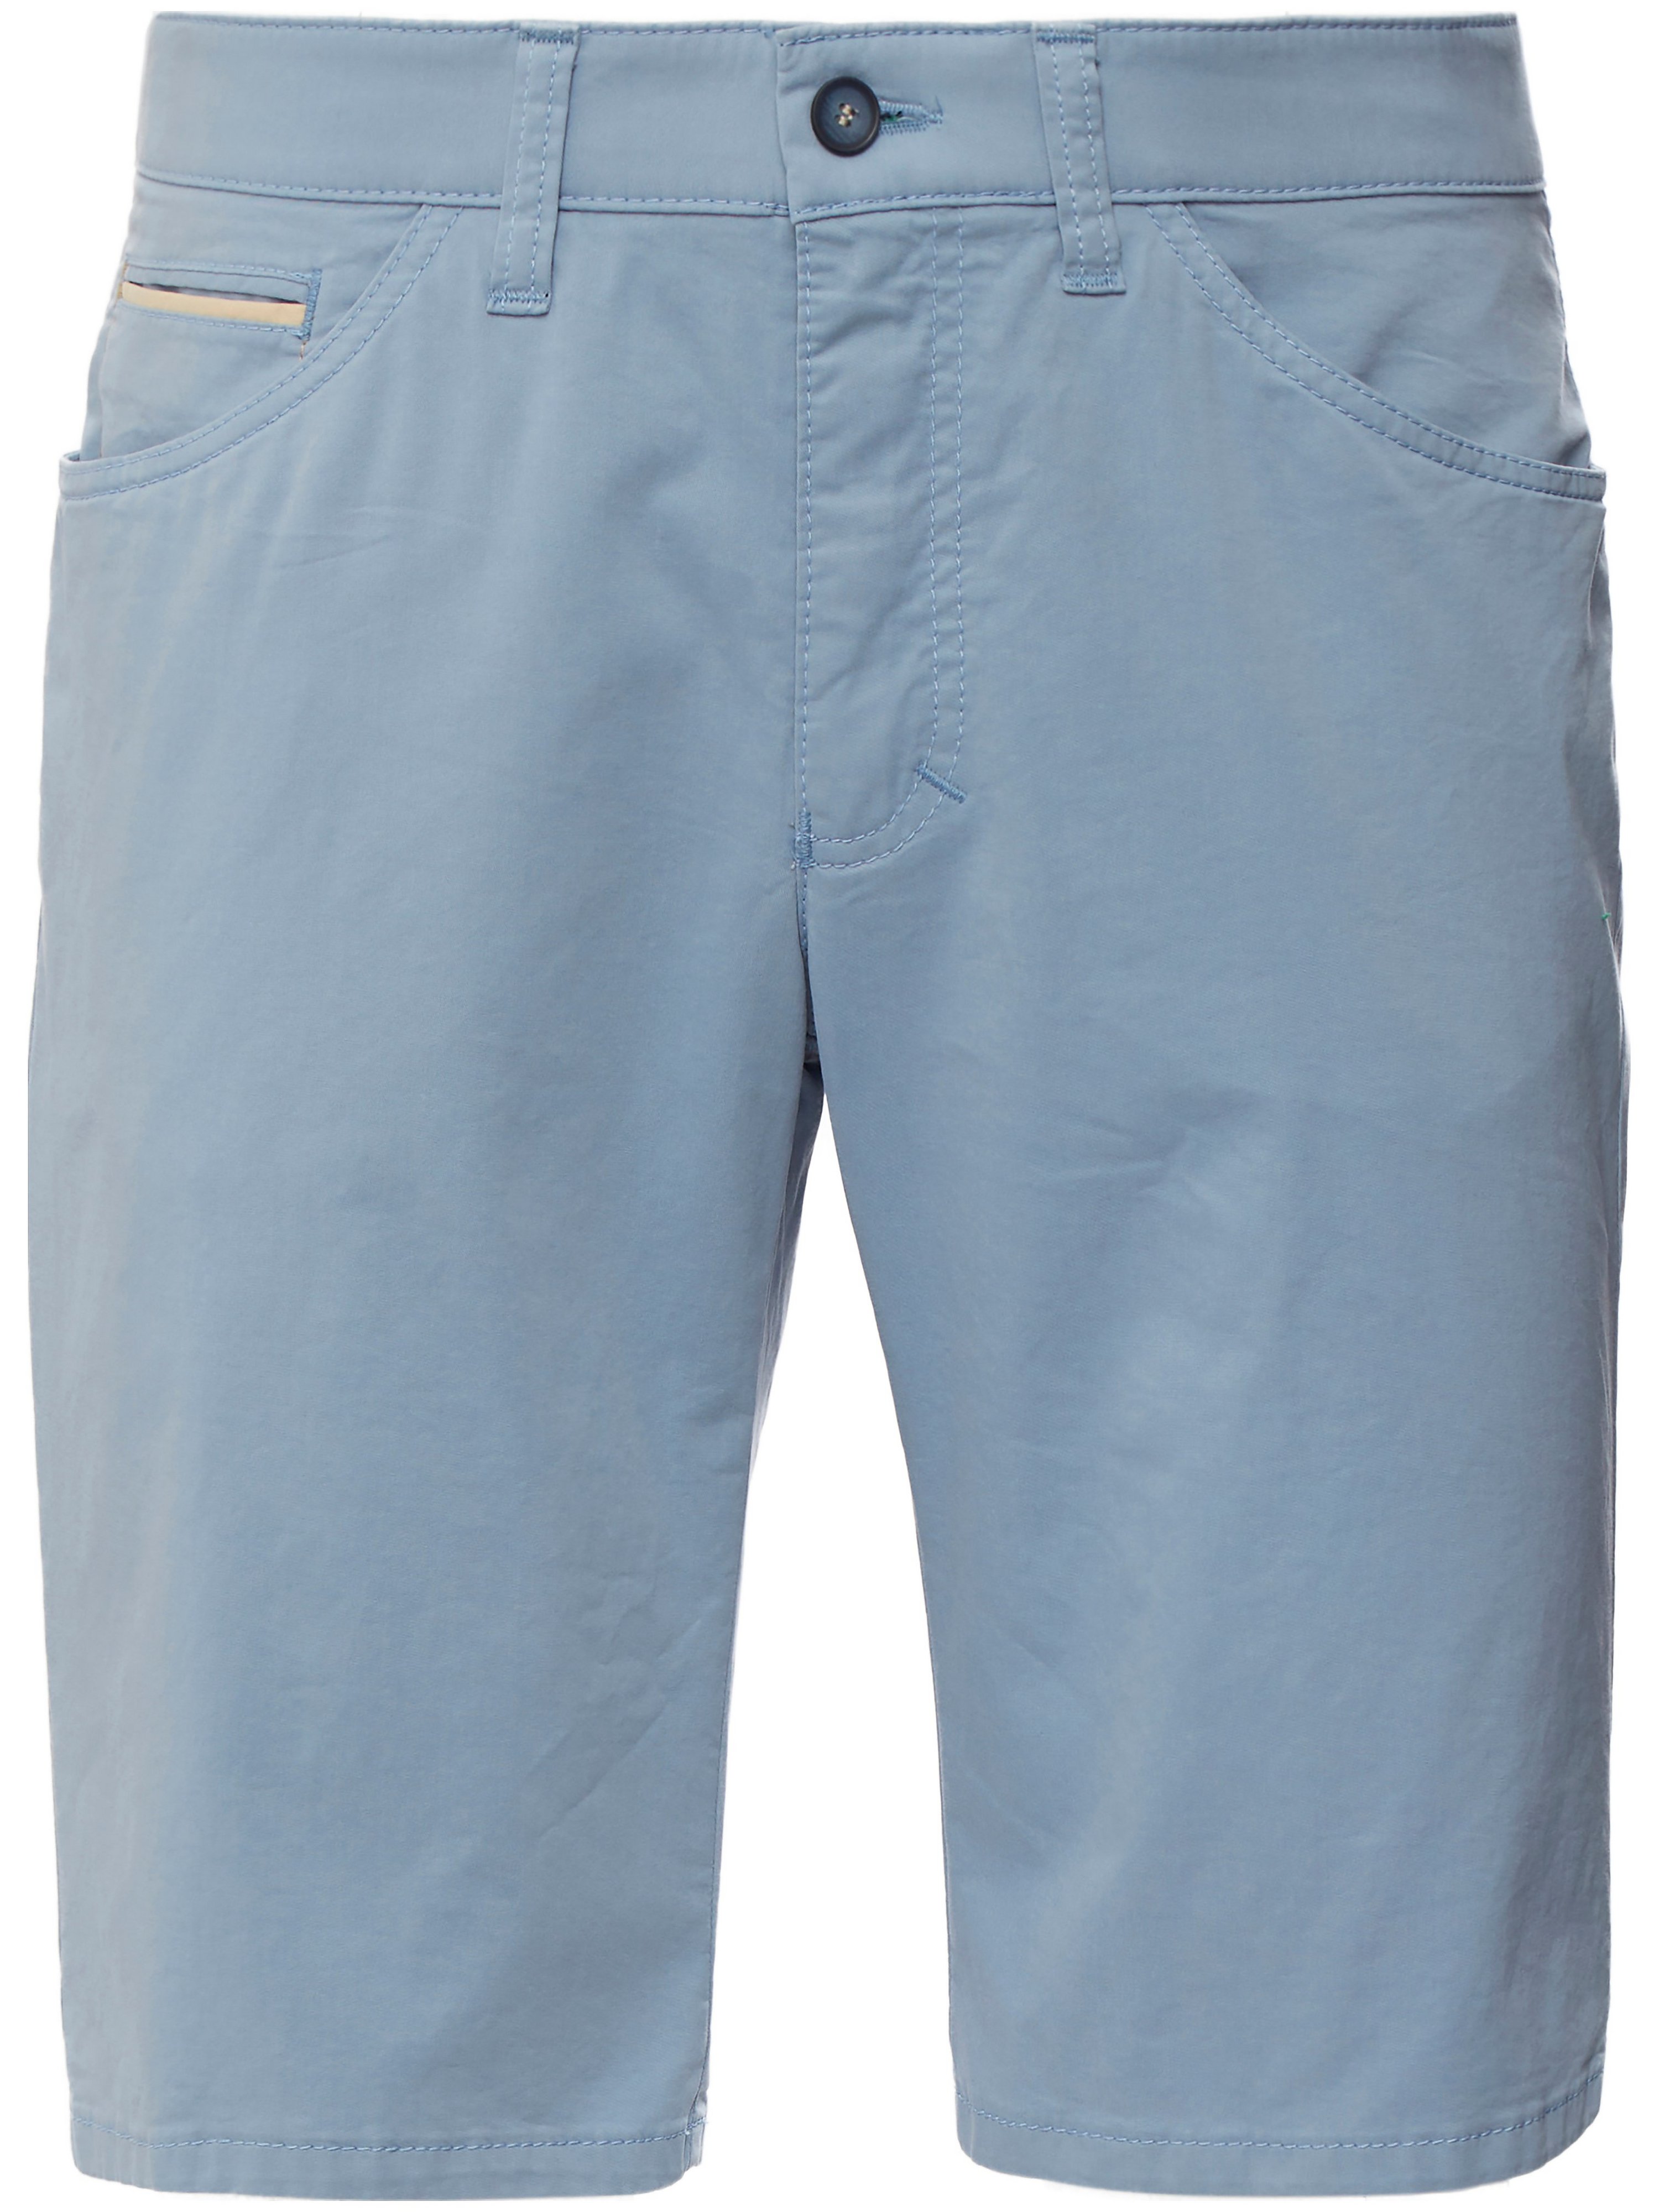 Le bermuda 5 poches  CLUB OF COMFORT bleu taille 42